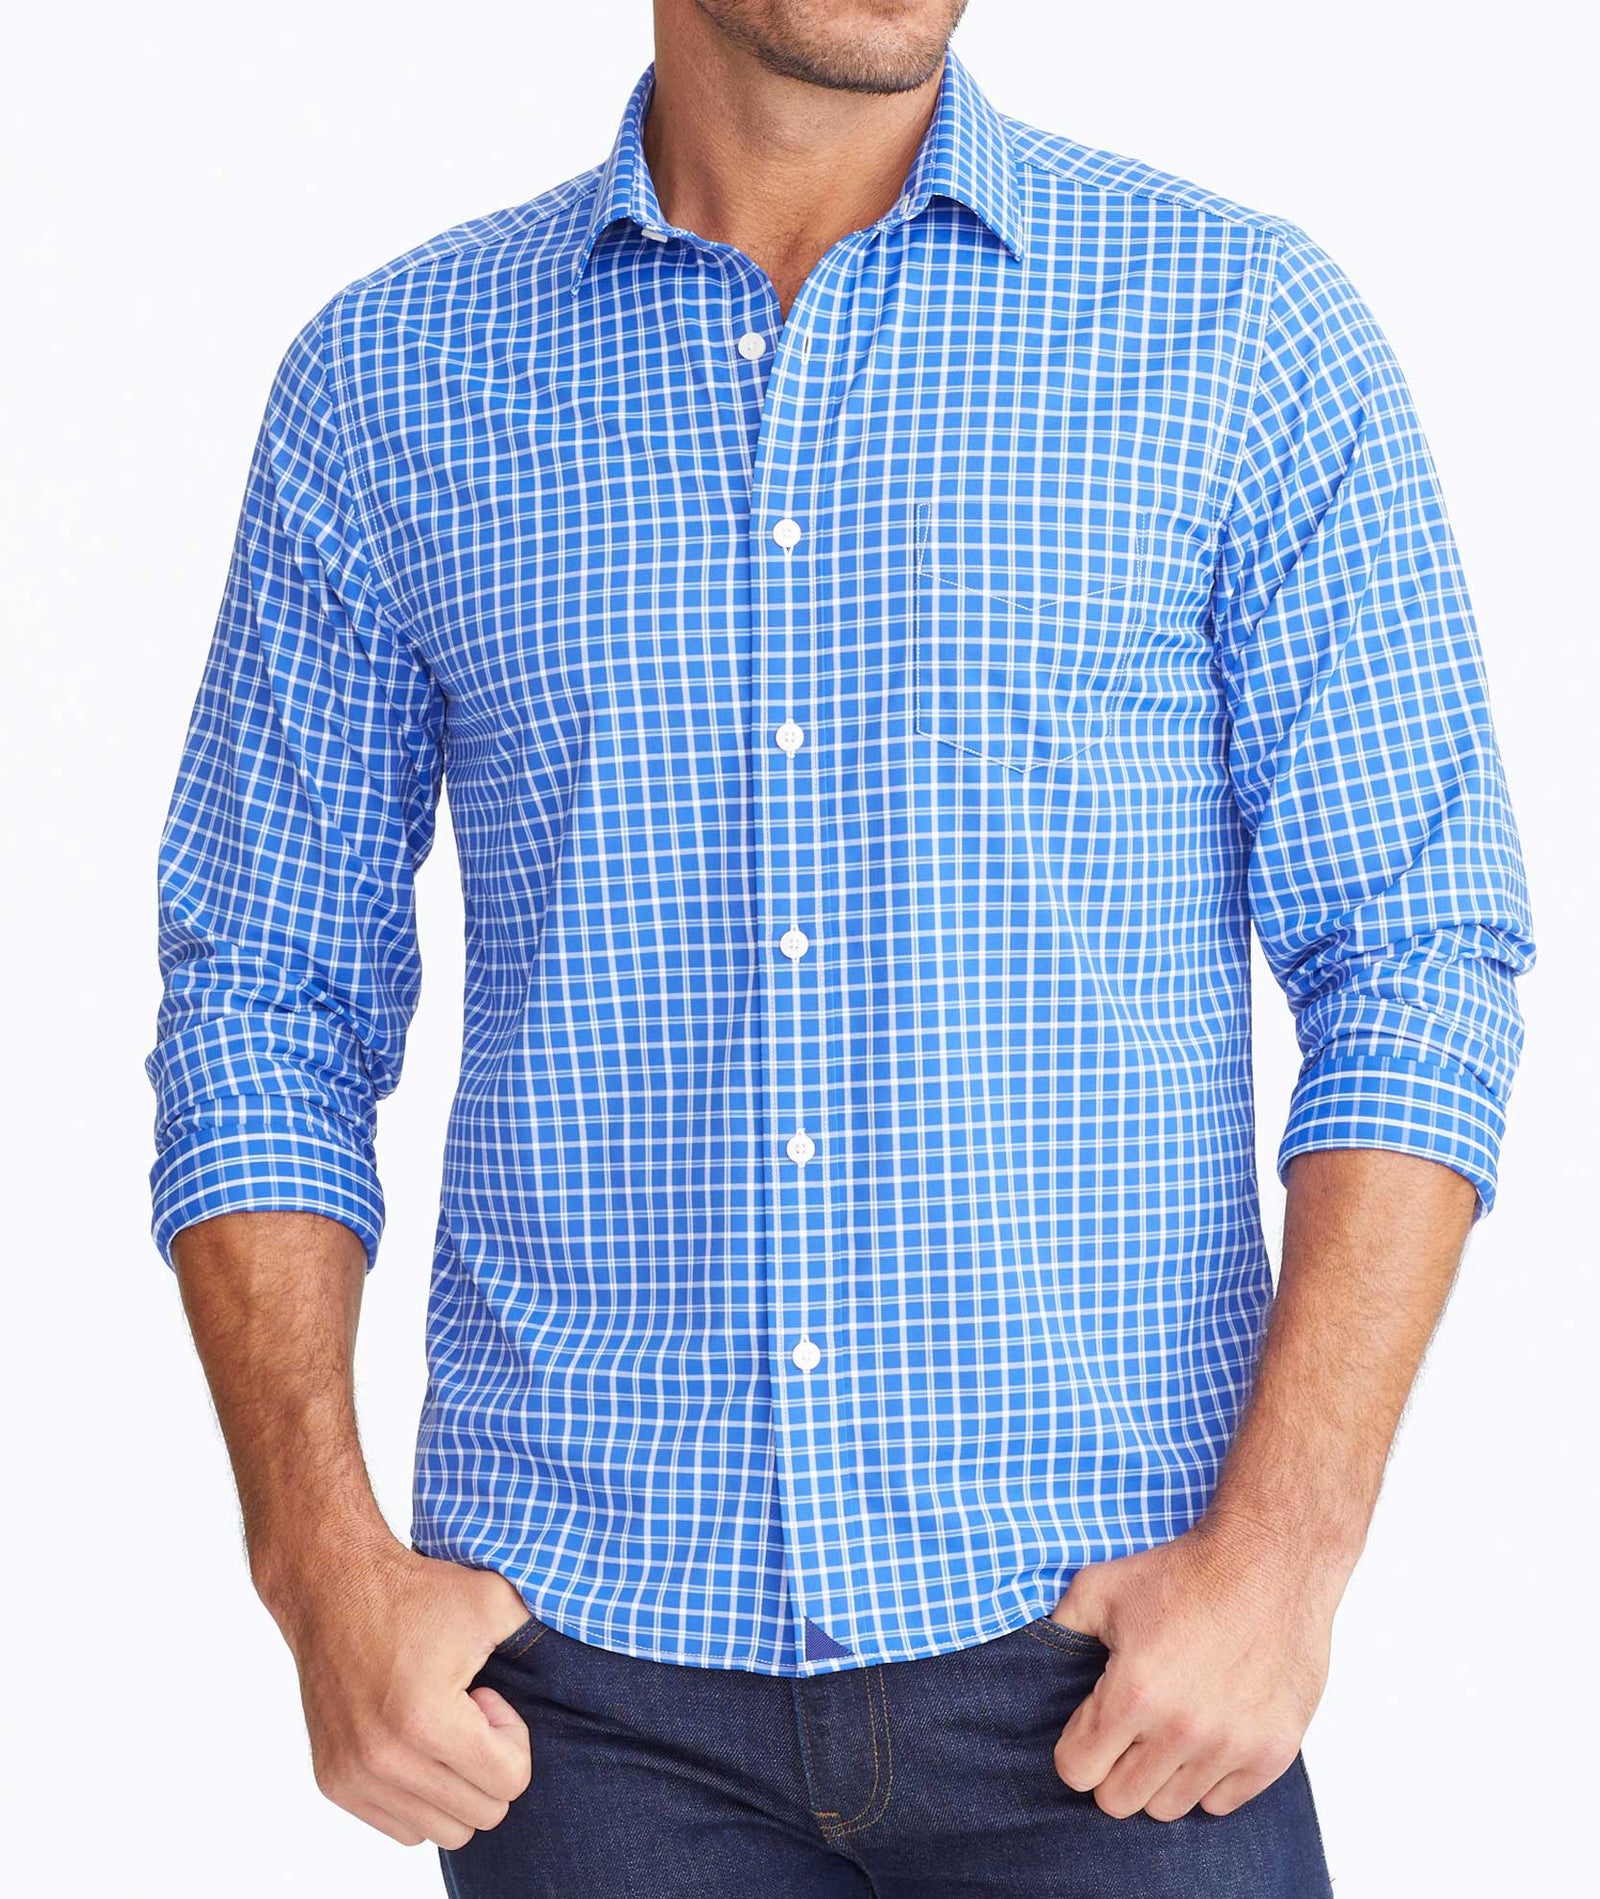 Wrinkle-Free Performance+ Kiepersol Shirt Blue with White Check ...